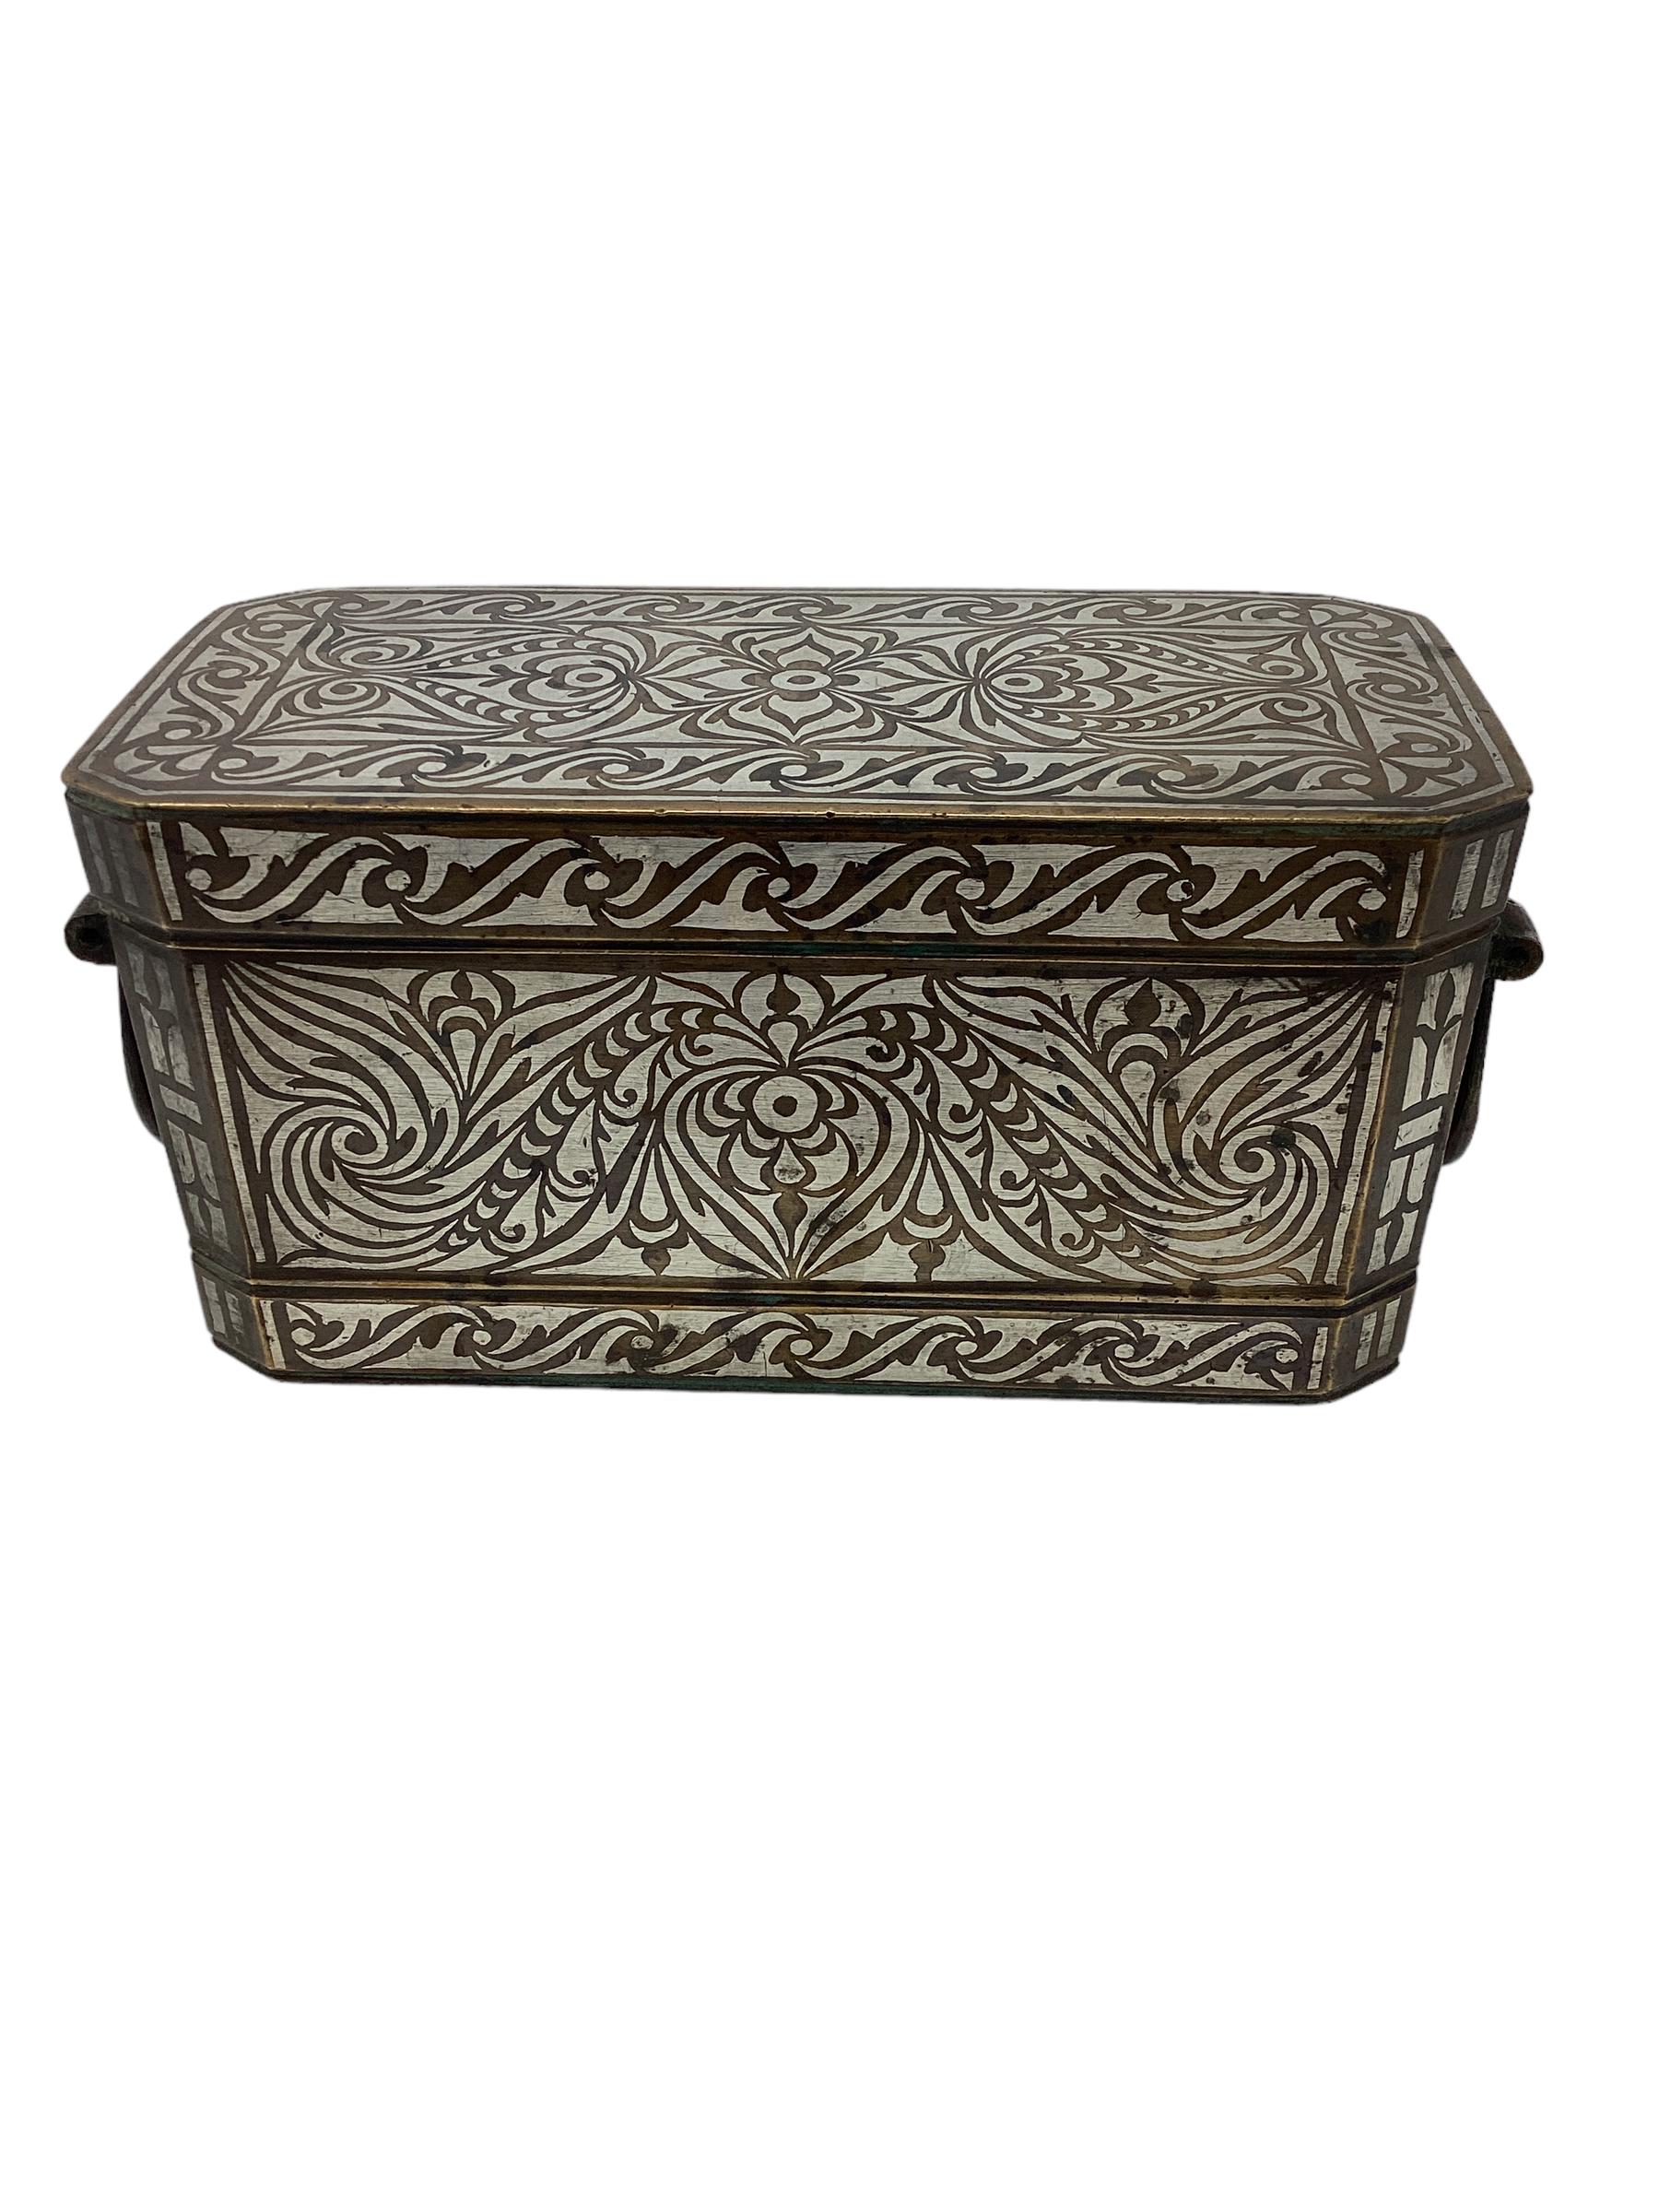 Southern Philippine (Mindanao) brass with silver inlay betel box. The top lifts to reveal 4 hinged compartments that held the betel leaf, areca nut, slacked lime and chewing condiments. The box is profusely inlaid in silver in the 